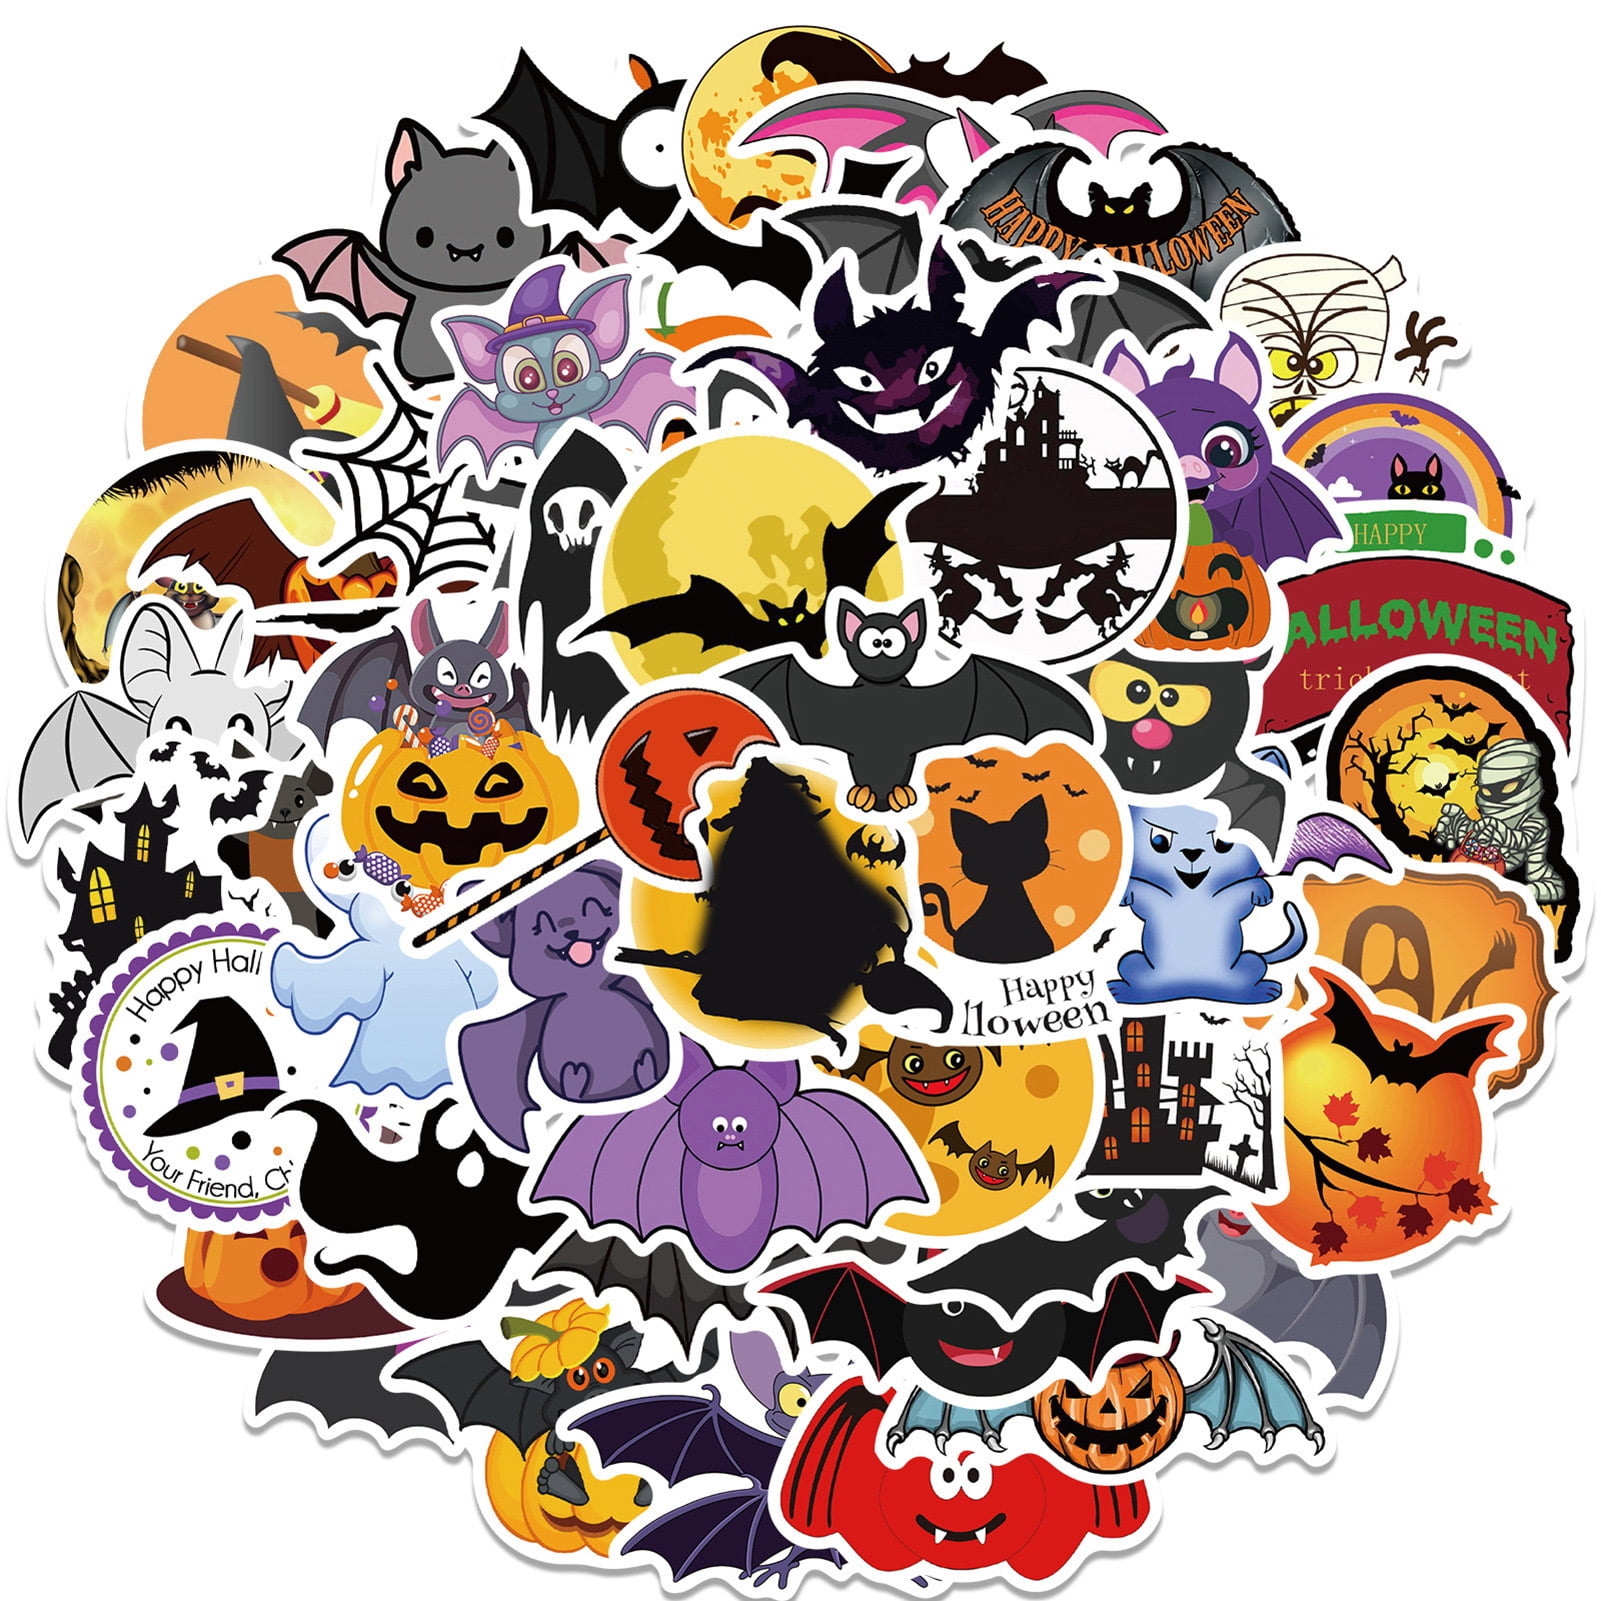 Halloween is cool sticker - Holographic Halloween Sticker - Spooky cute  stickers - Kindle stickers - Halloween Trendy aesthetic sticker